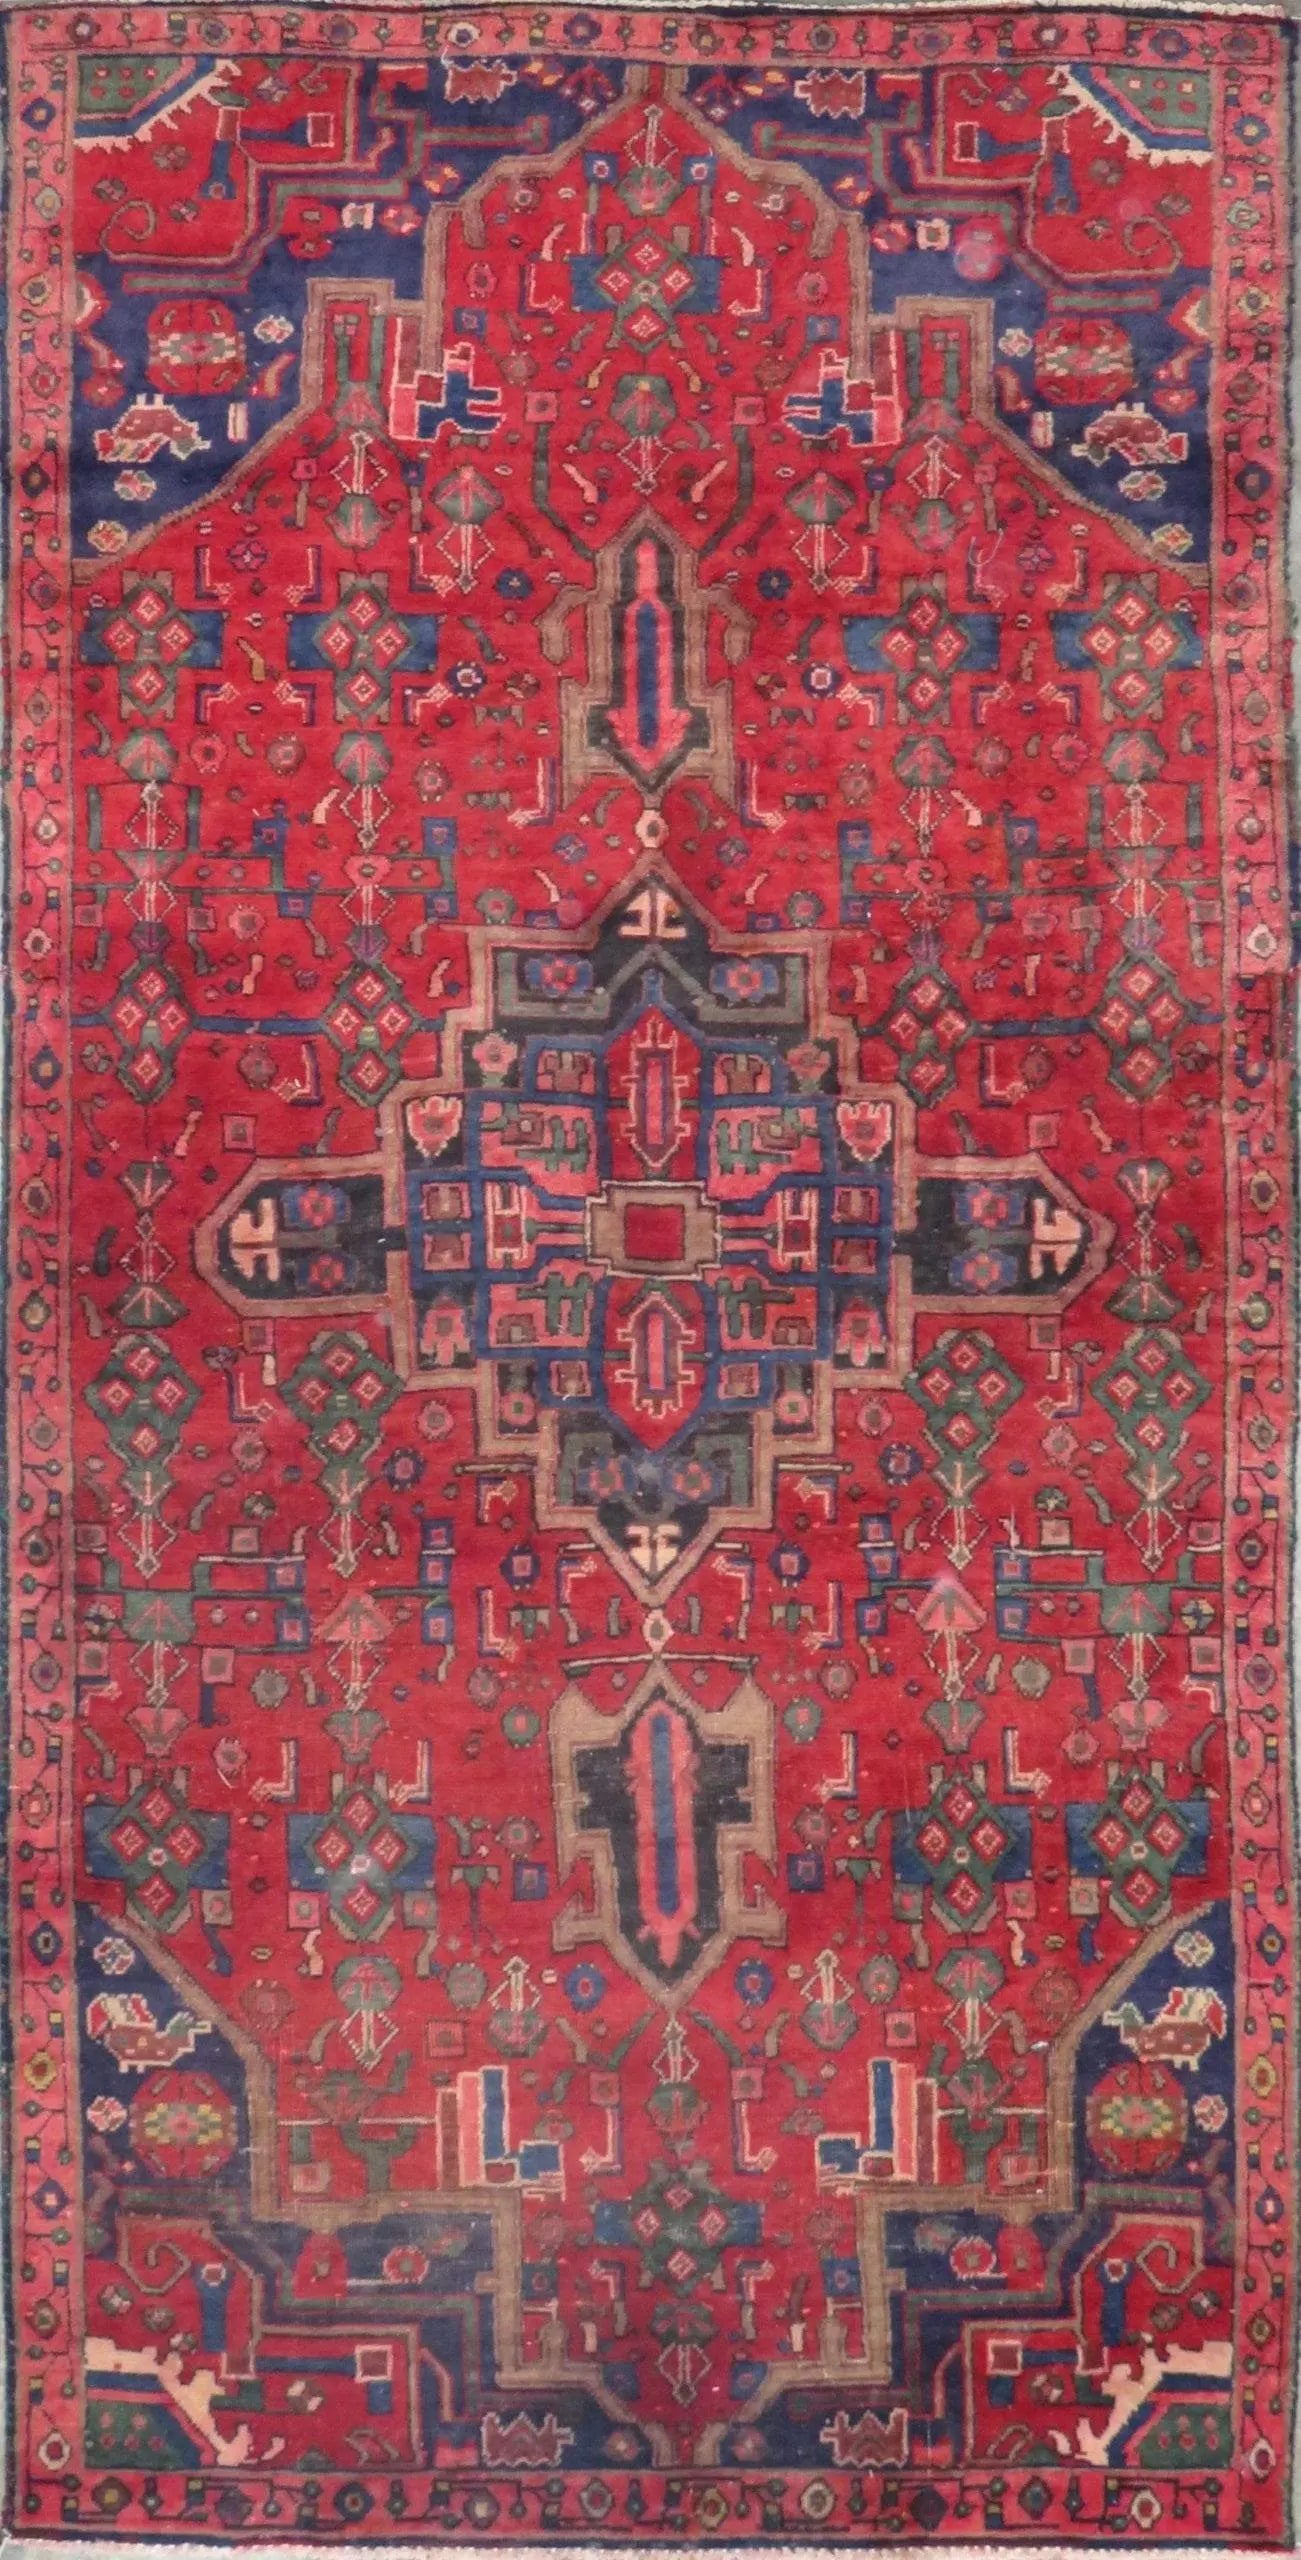 Hand-Knotted Persian Wool Rug _ Luxurious Vintage Design, 7'2" x 3'7", Artisan Crafted